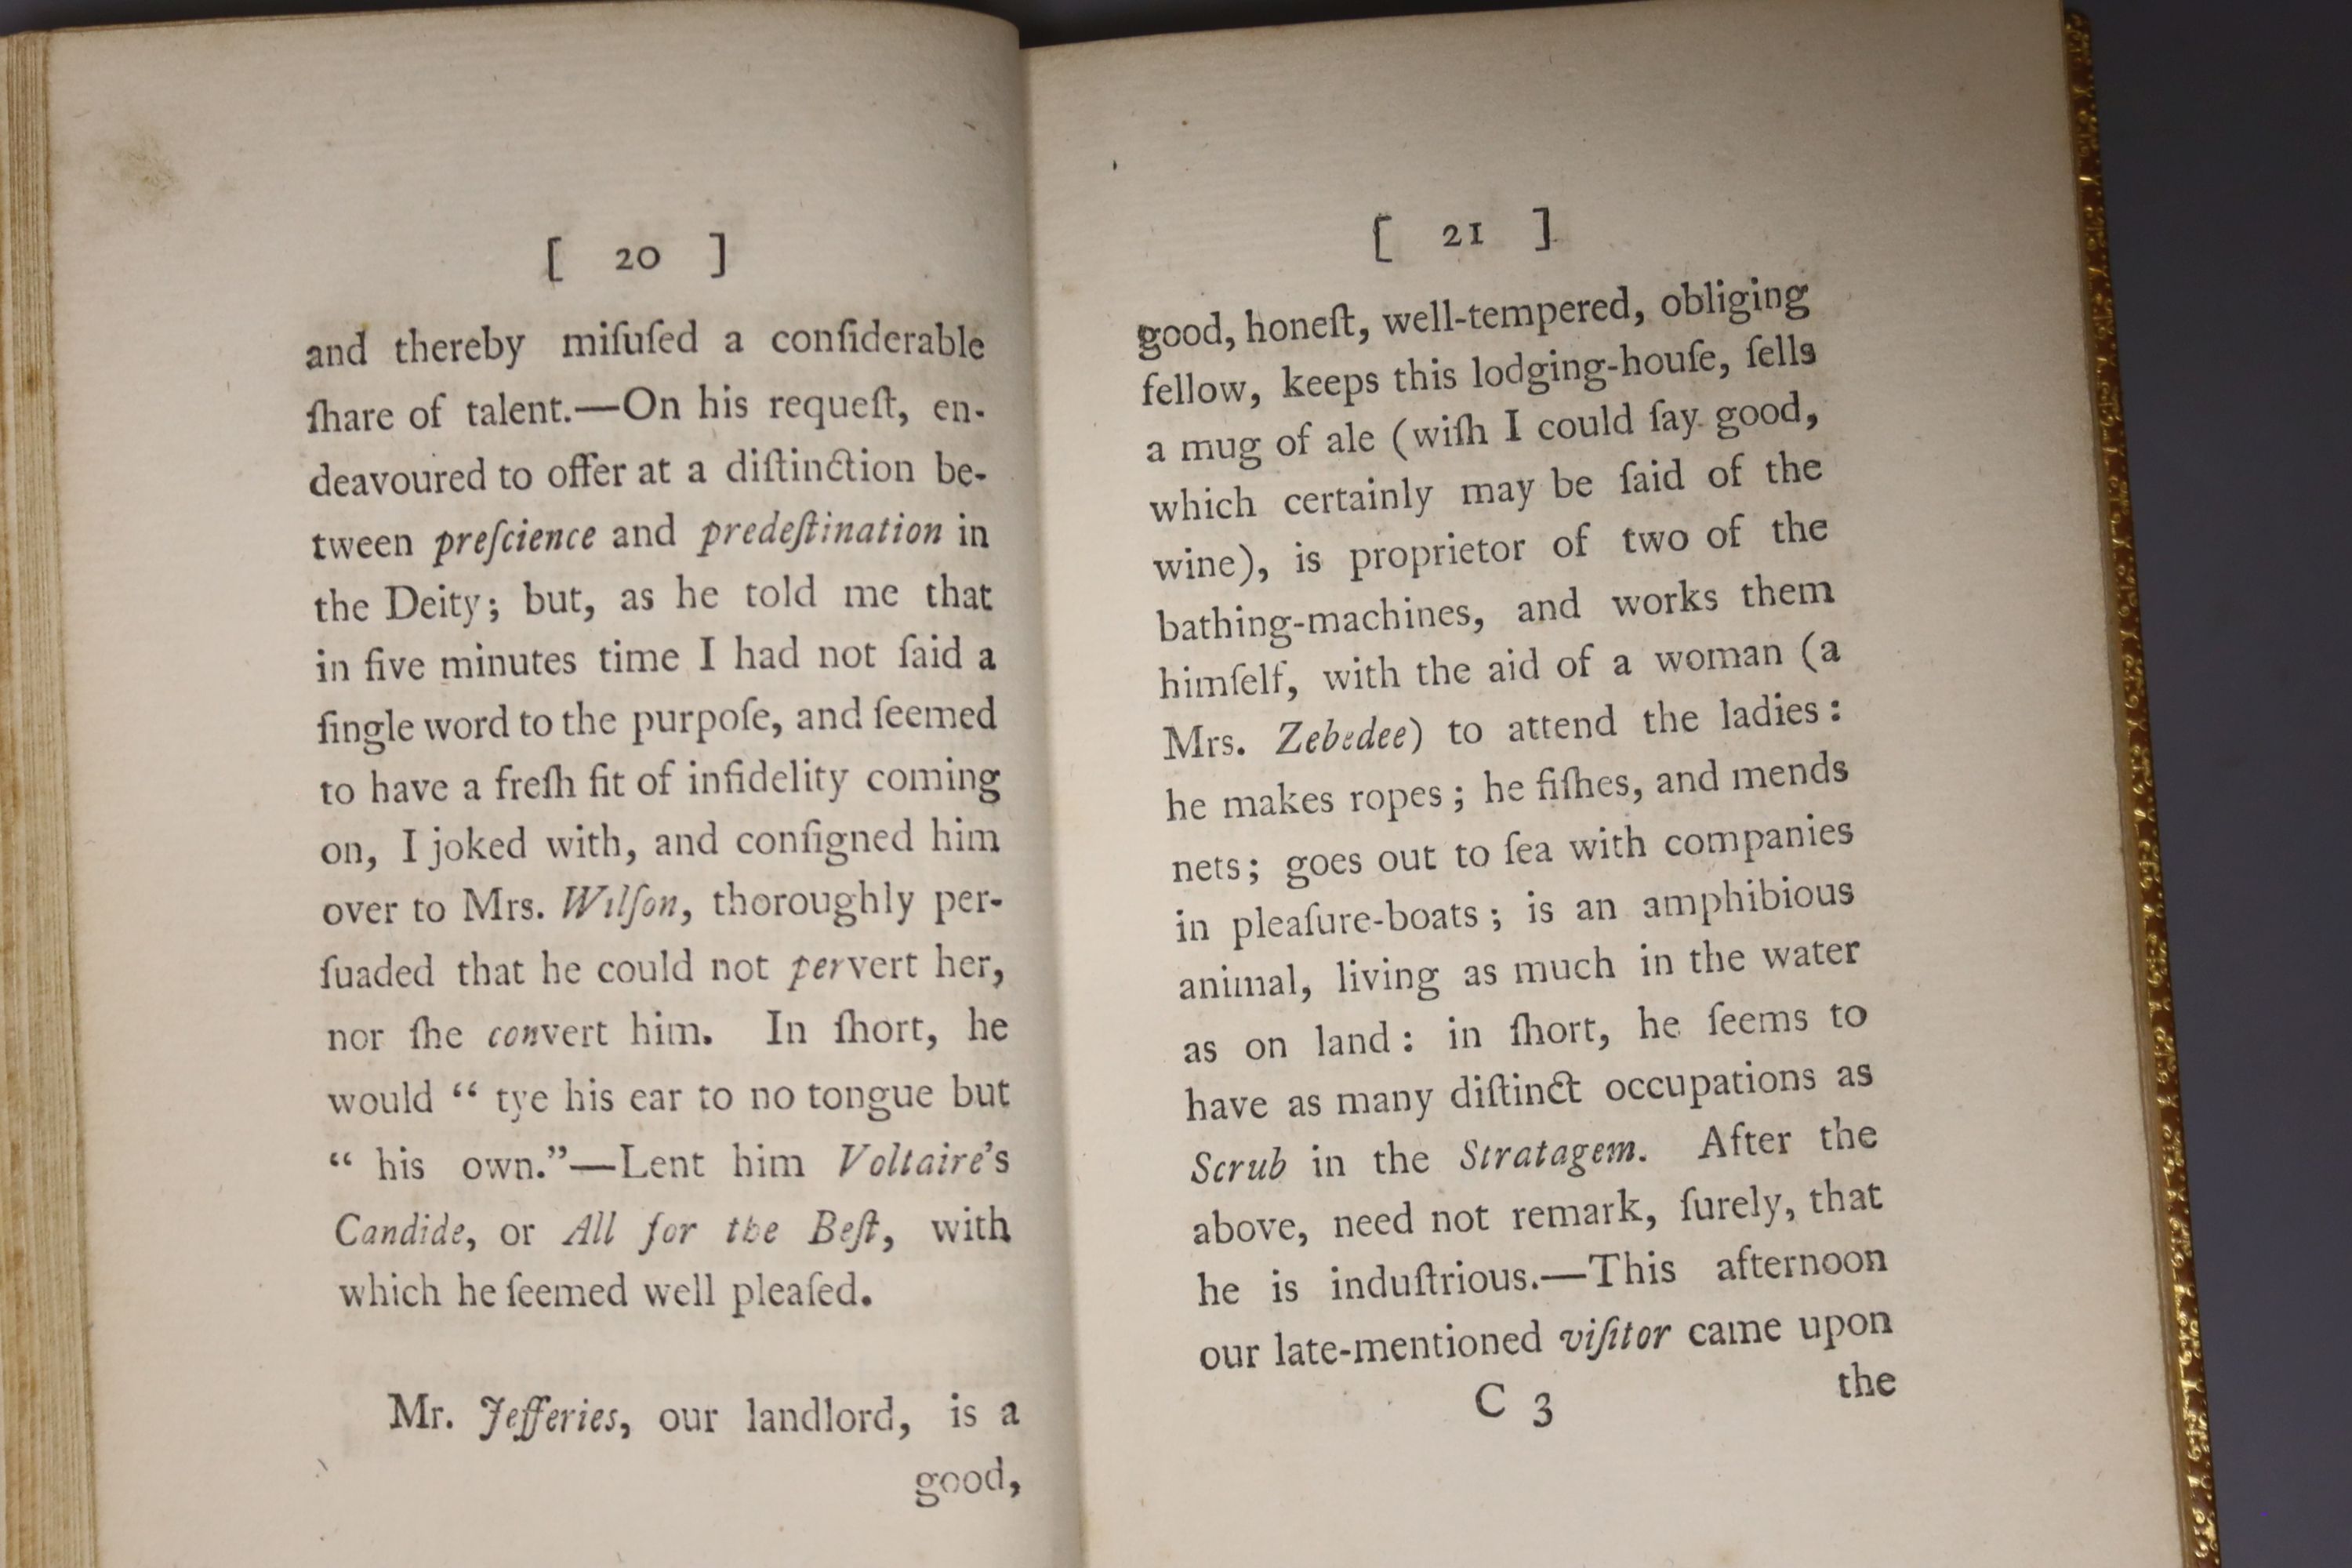 A diary kept in excursion to Littlehampton and Brighthelmstone 1778/9, vol I